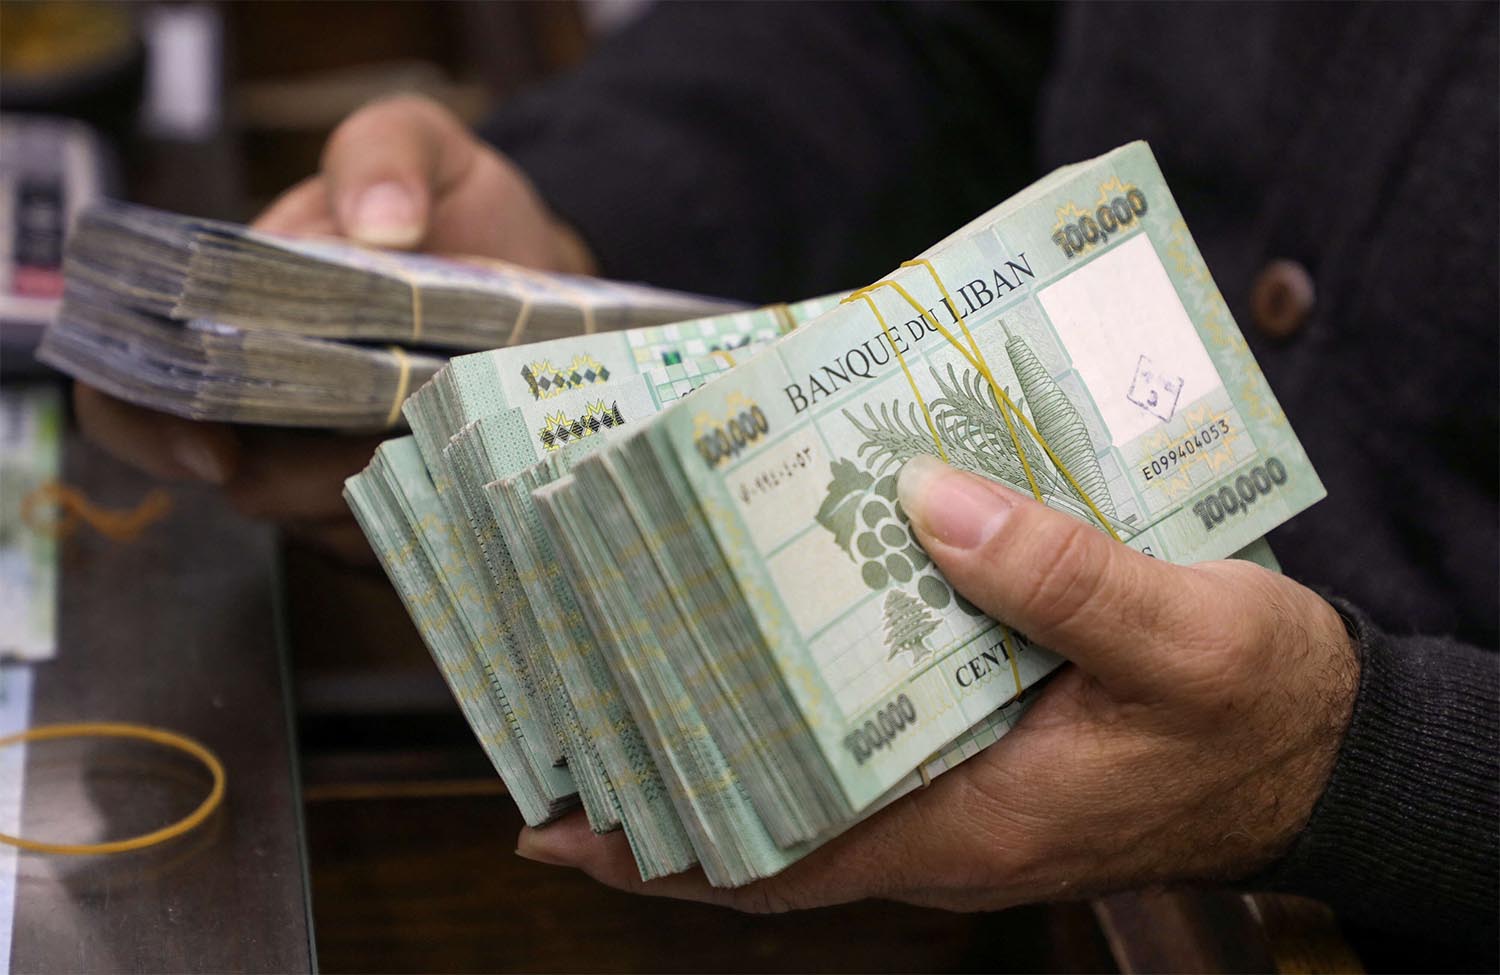 The Lebanese pound has lost more than 90% of its value since 2019